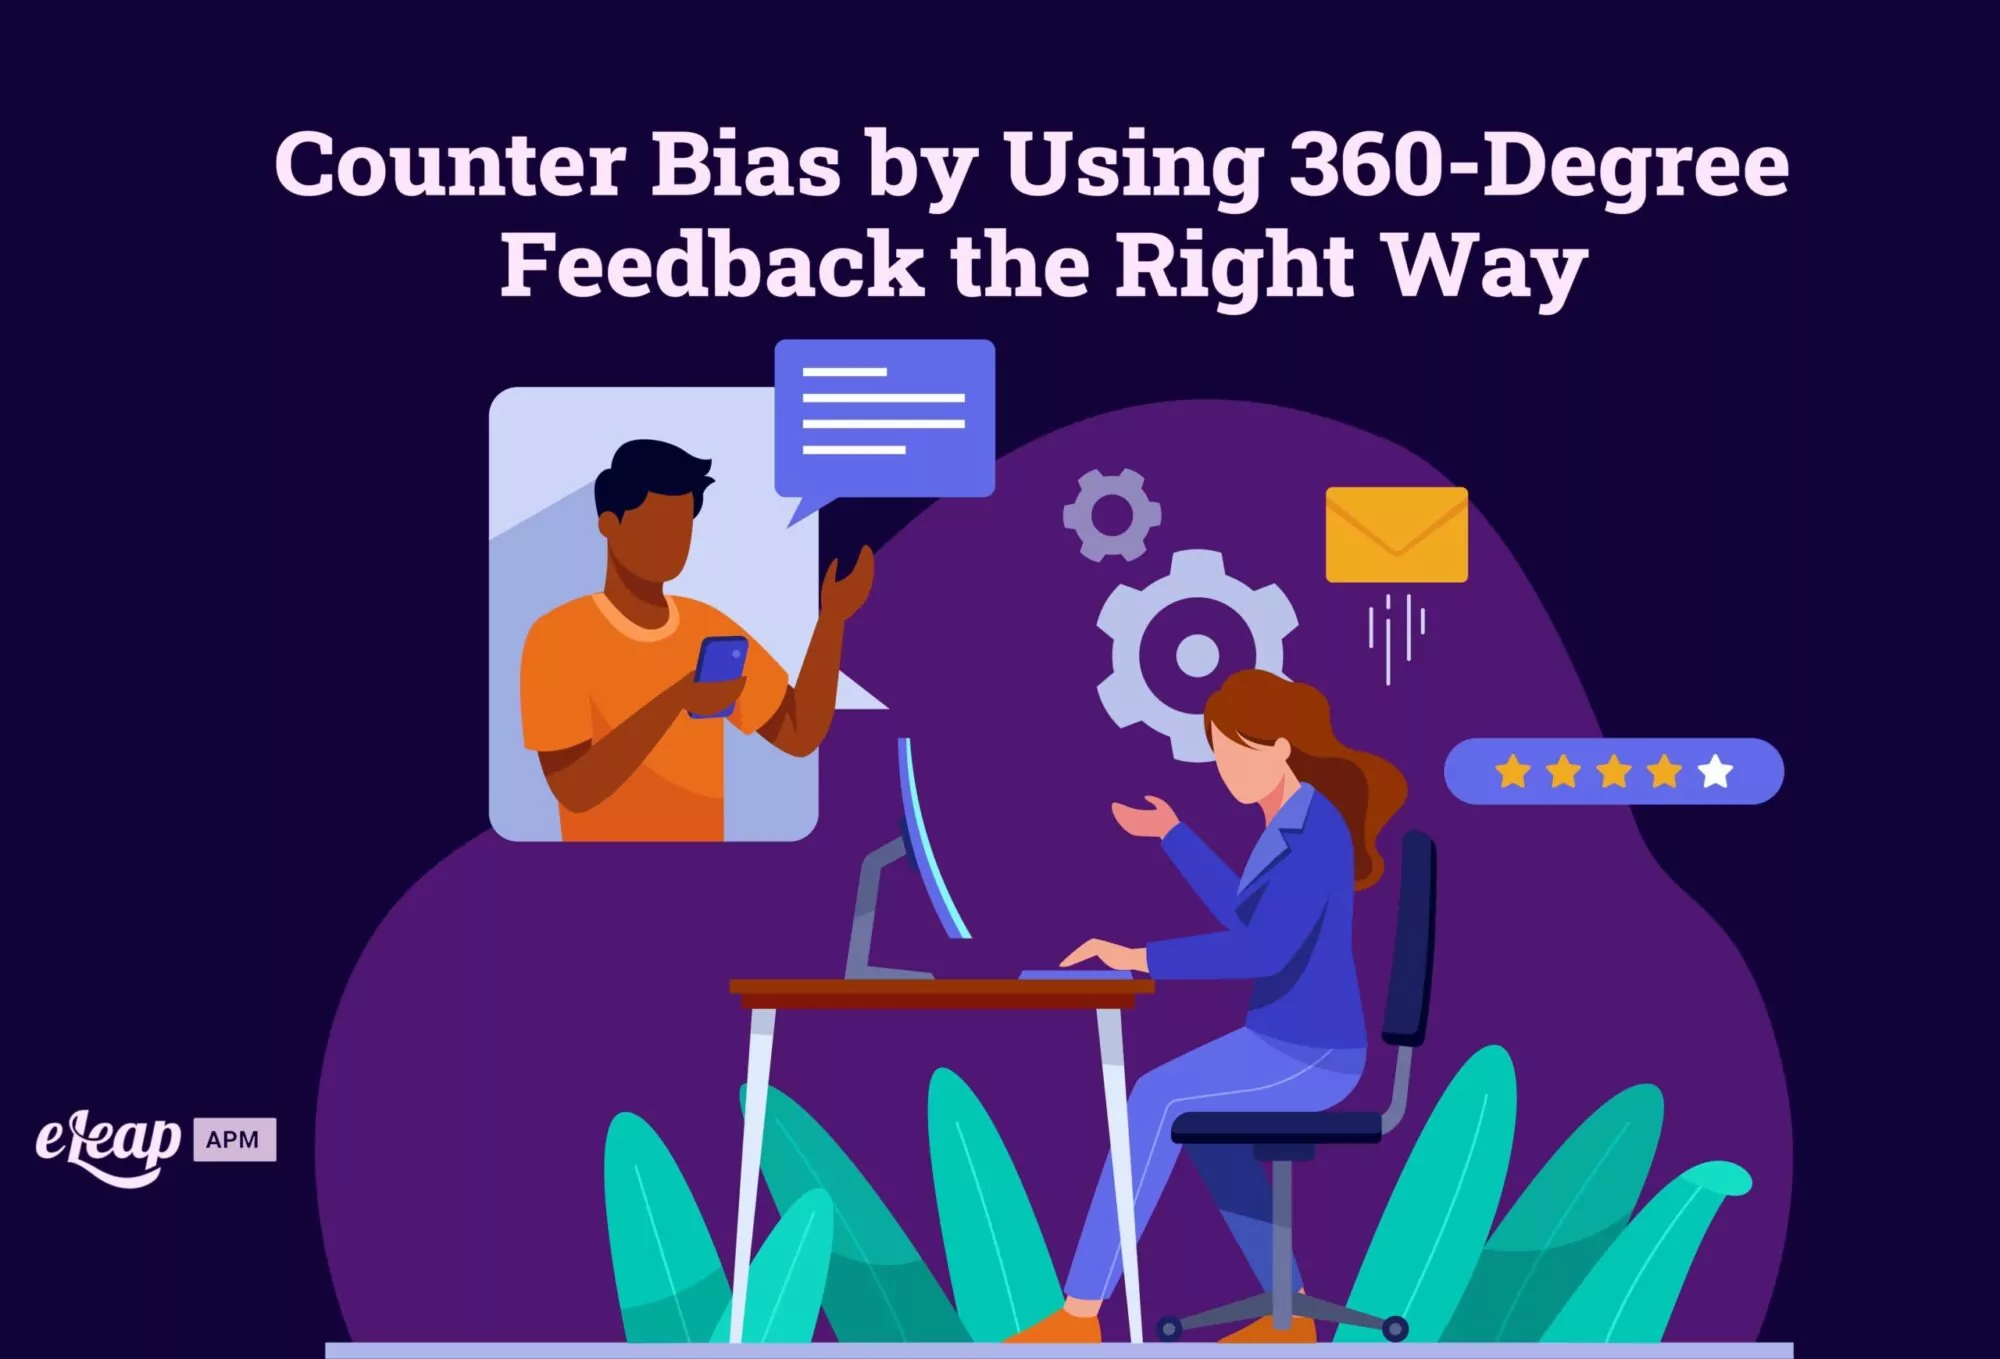 Counter Bias by Using 360-Degree Feedback the Right Way